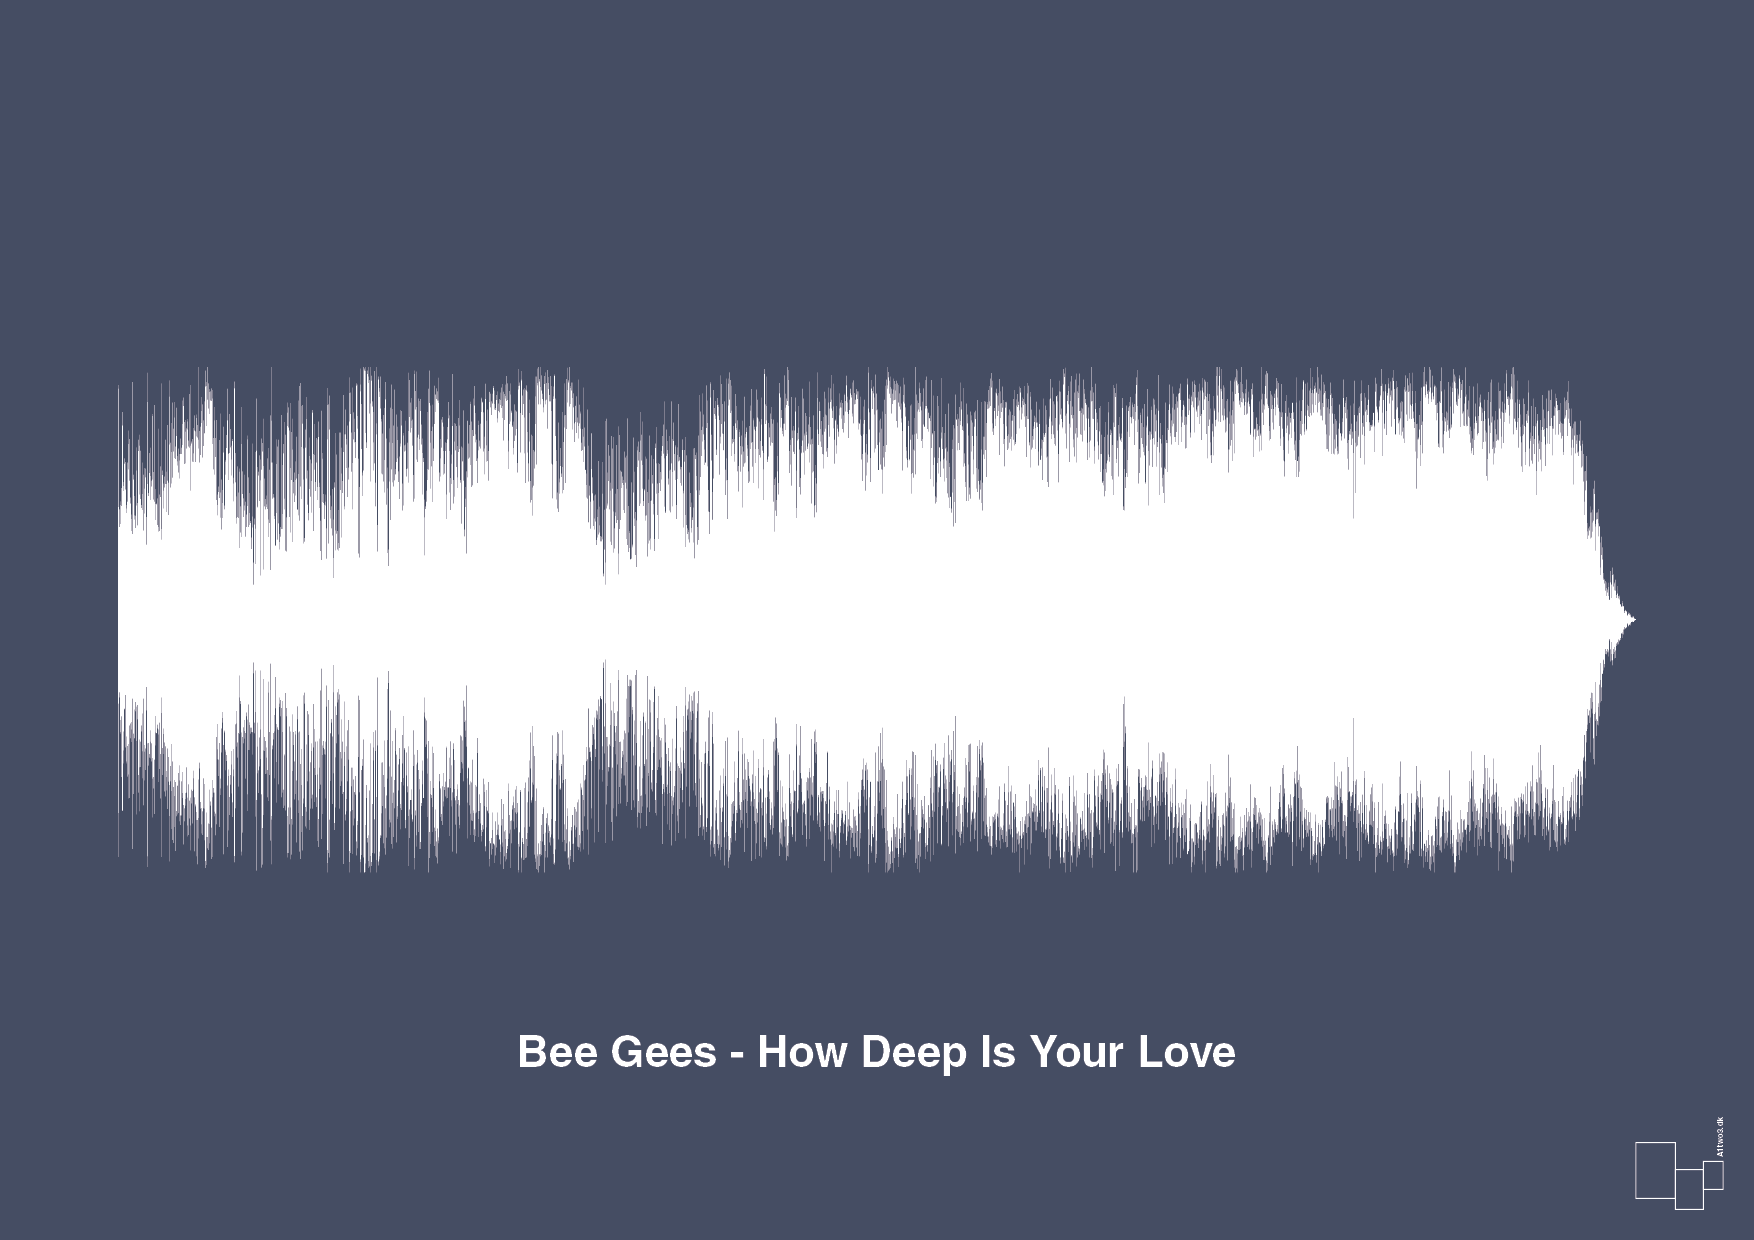 bee gees - how deep is your love - Plakat med Musik i Petrol